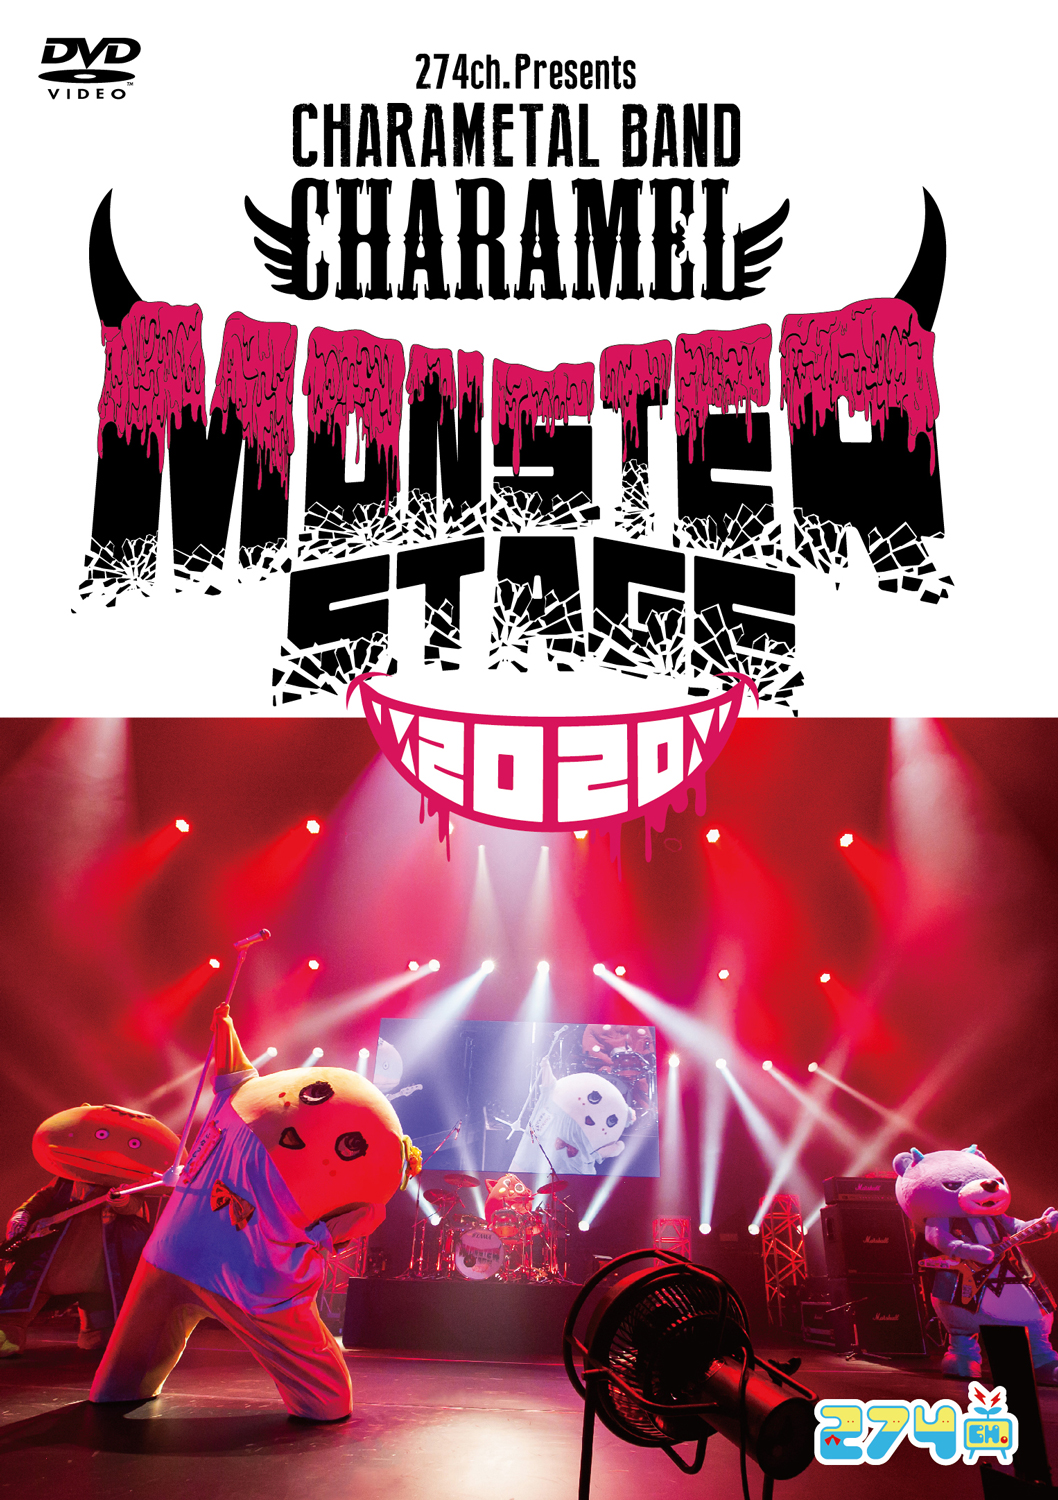 274ch.Presents CHARAMETAL BAND CHARAMEL “Monster Stage2020”